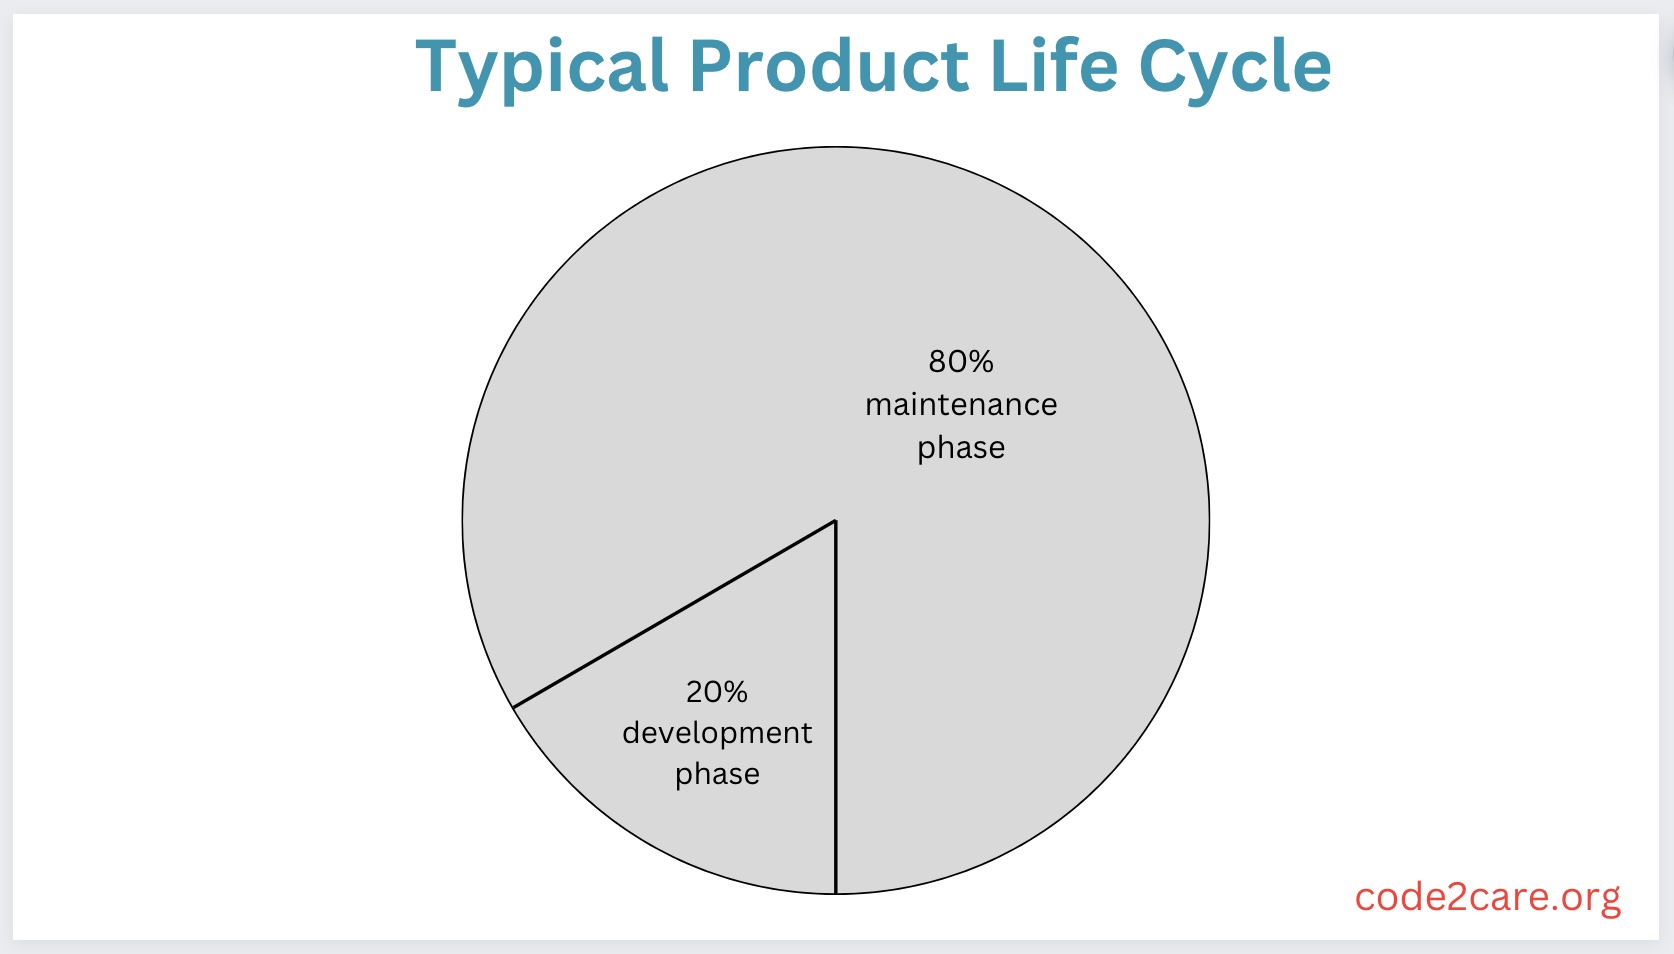 Typical Product Life Cycle